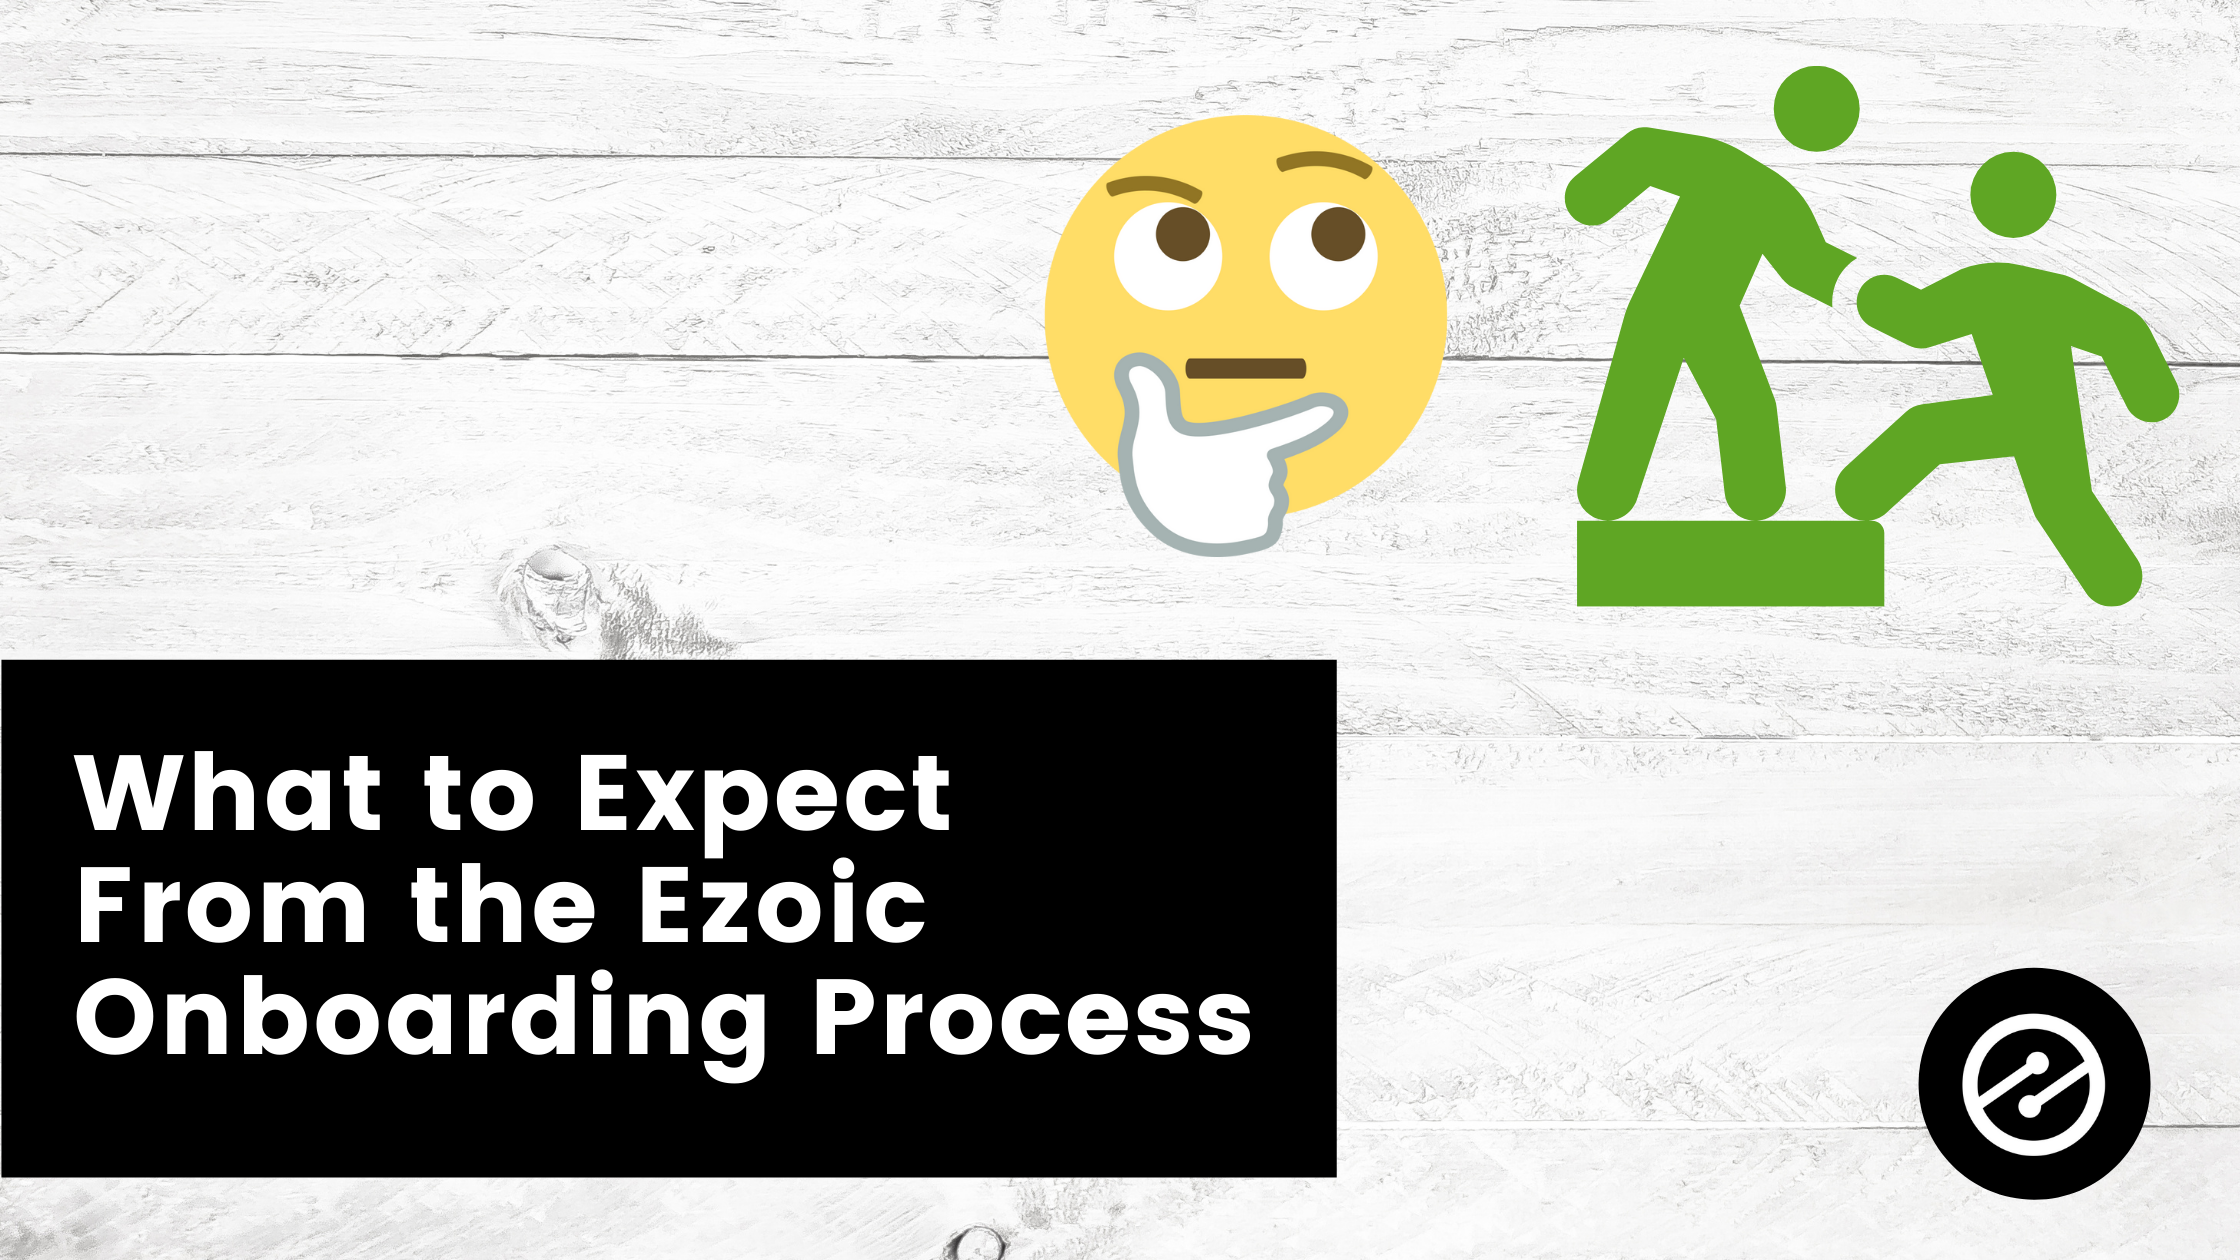 What to Expect From the Ezoic Onboarding Process